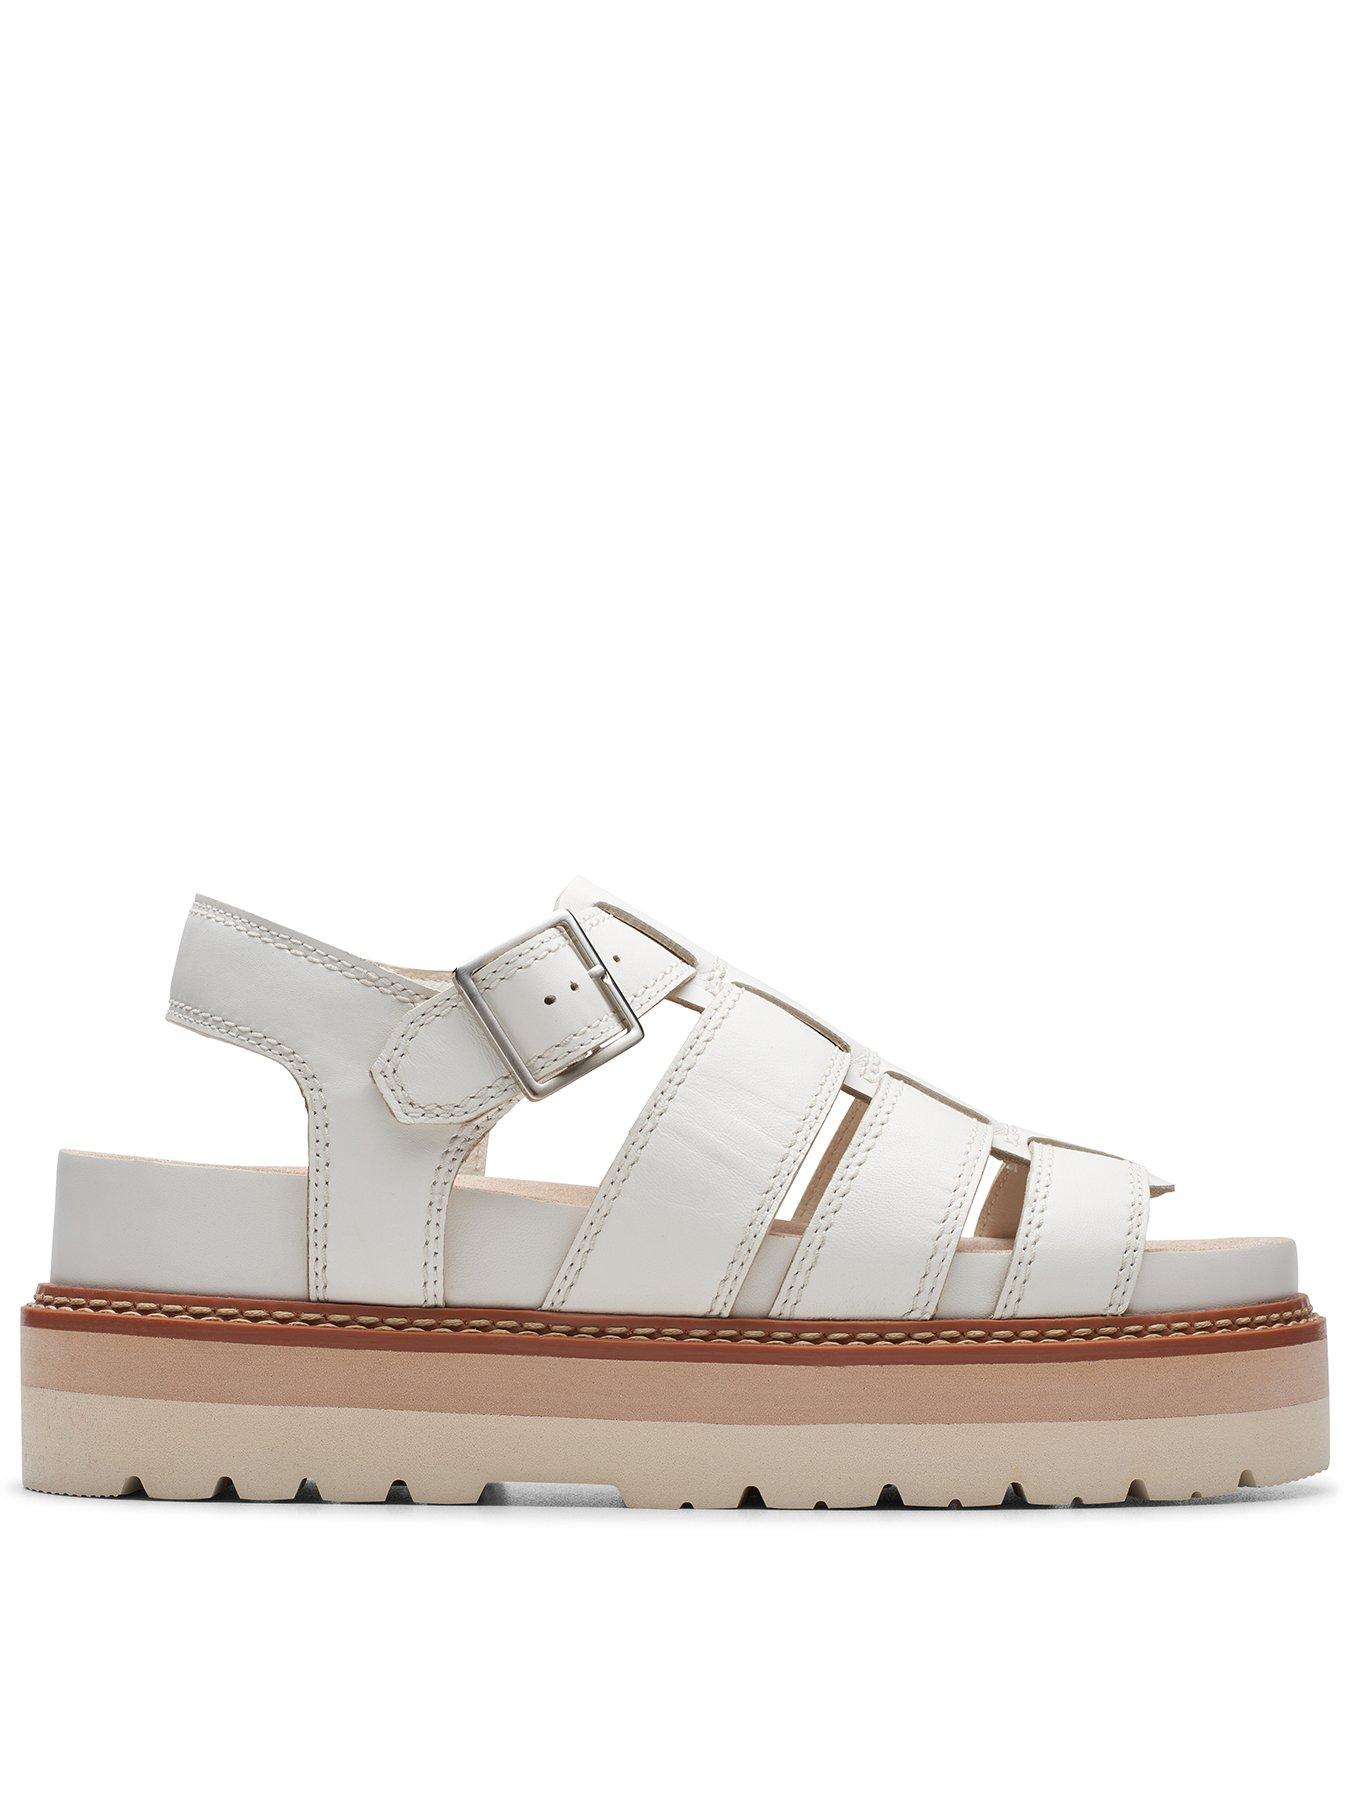 Clarks Off White Sandals in Latur - Dealers, Manufacturers & Suppliers -  Justdial